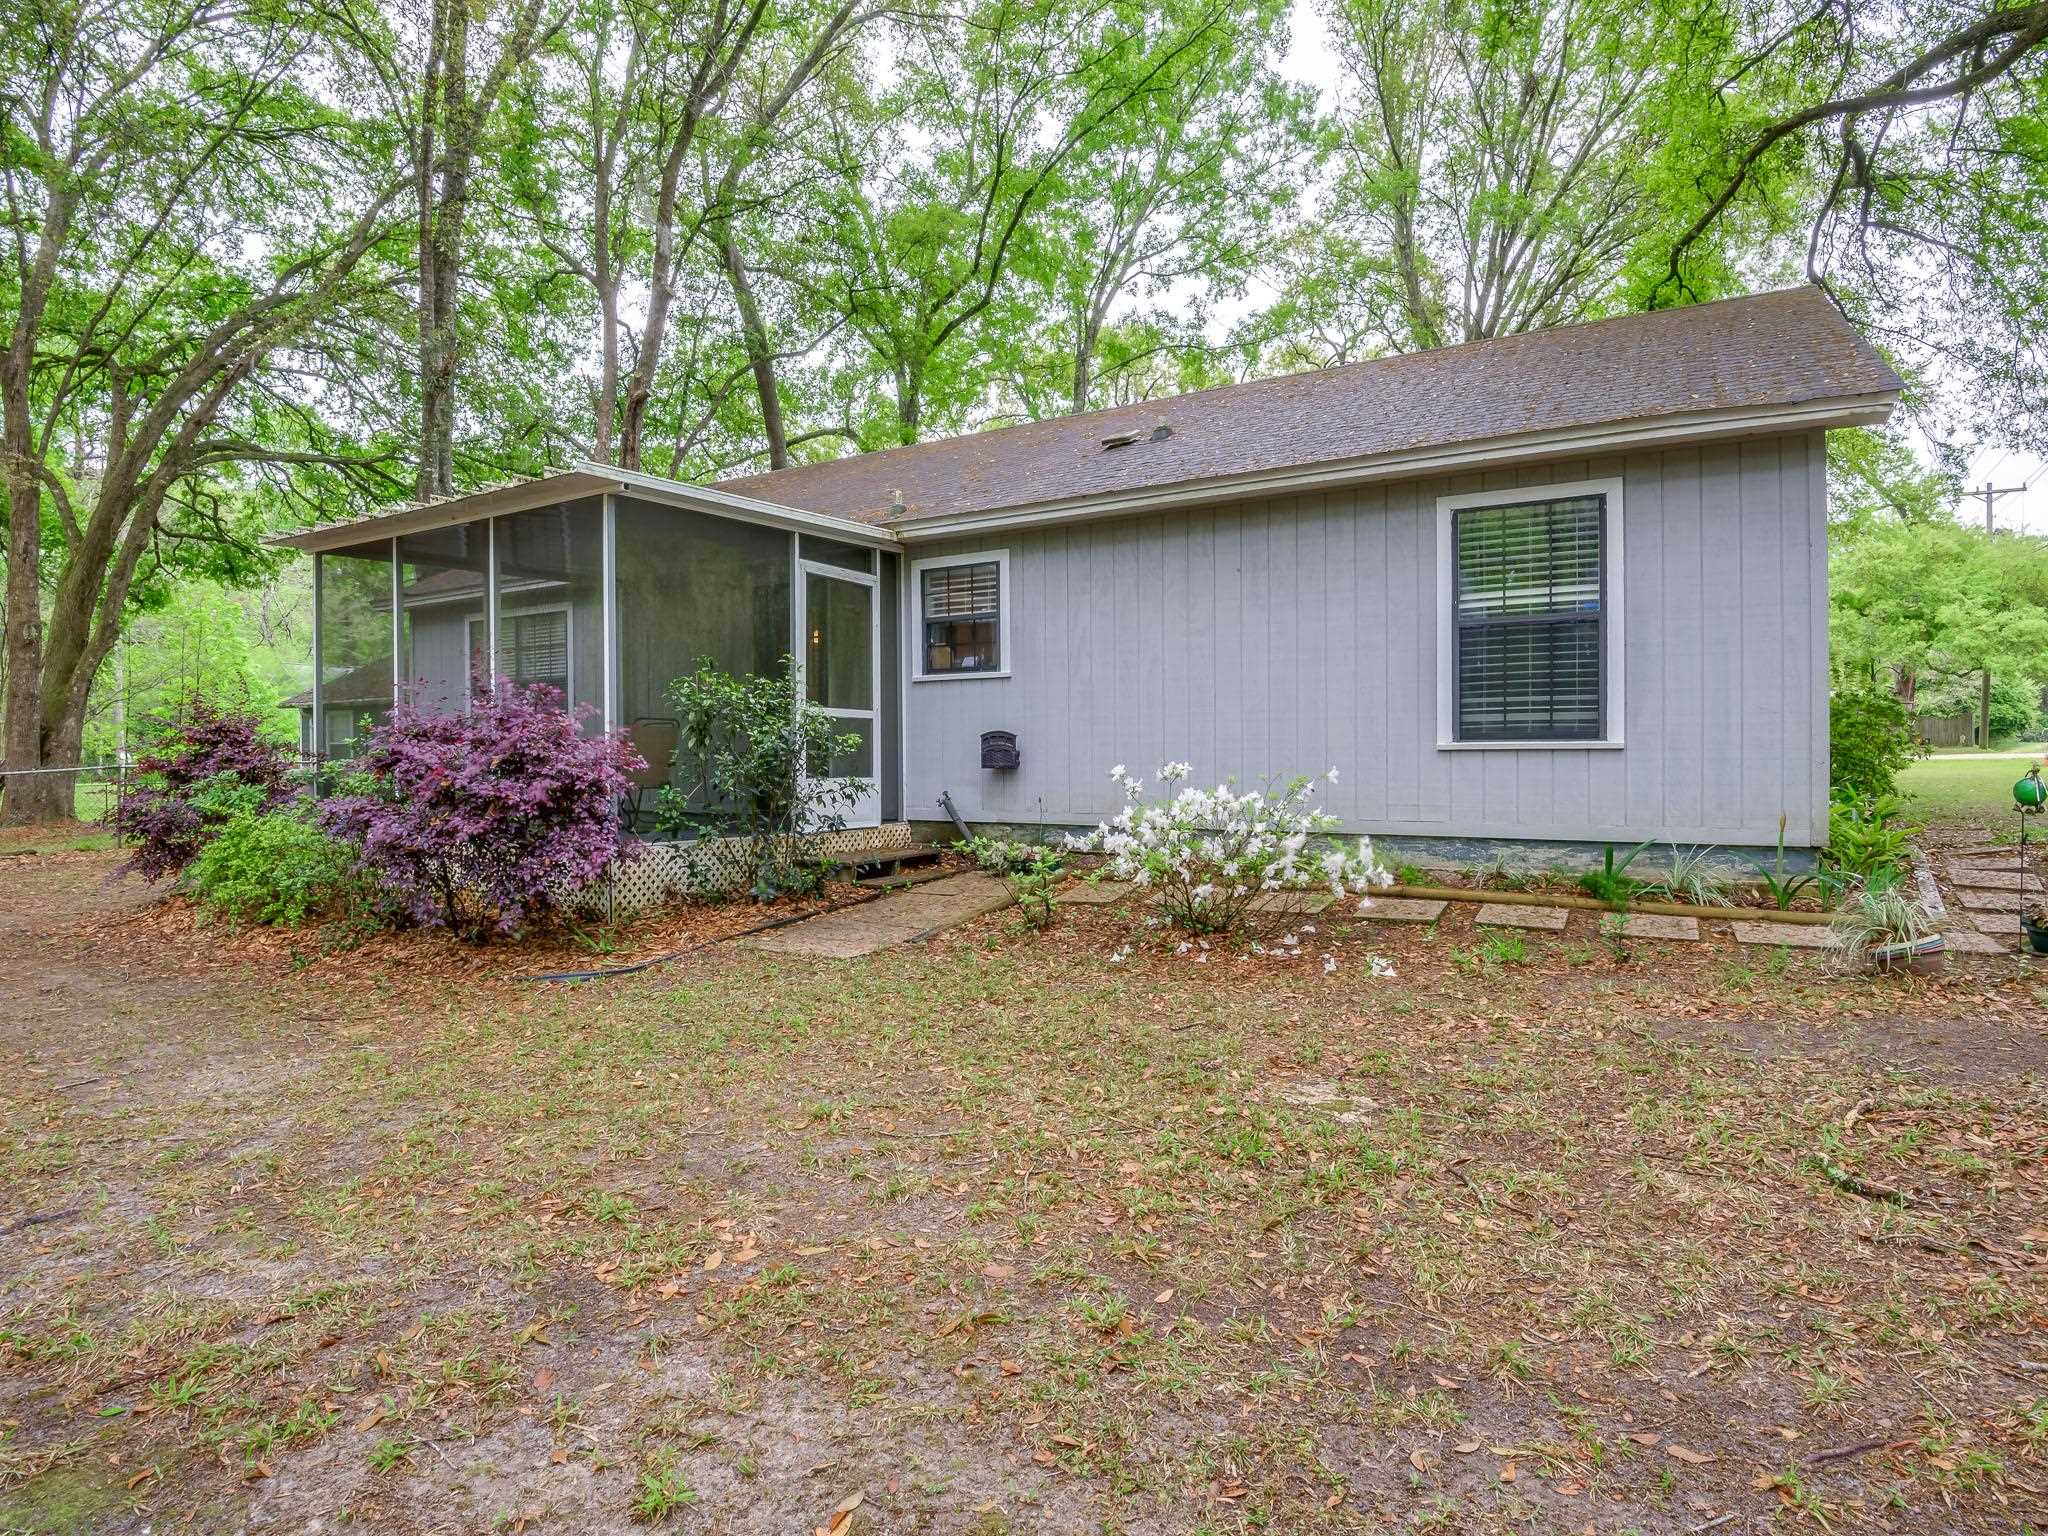 8200 Little Terry Circle,TALLAHASSEE,Florida 32311,3 Bedrooms Bedrooms,2 BathroomsBathrooms,Detached single family,8200 Little Terry Circle,369861